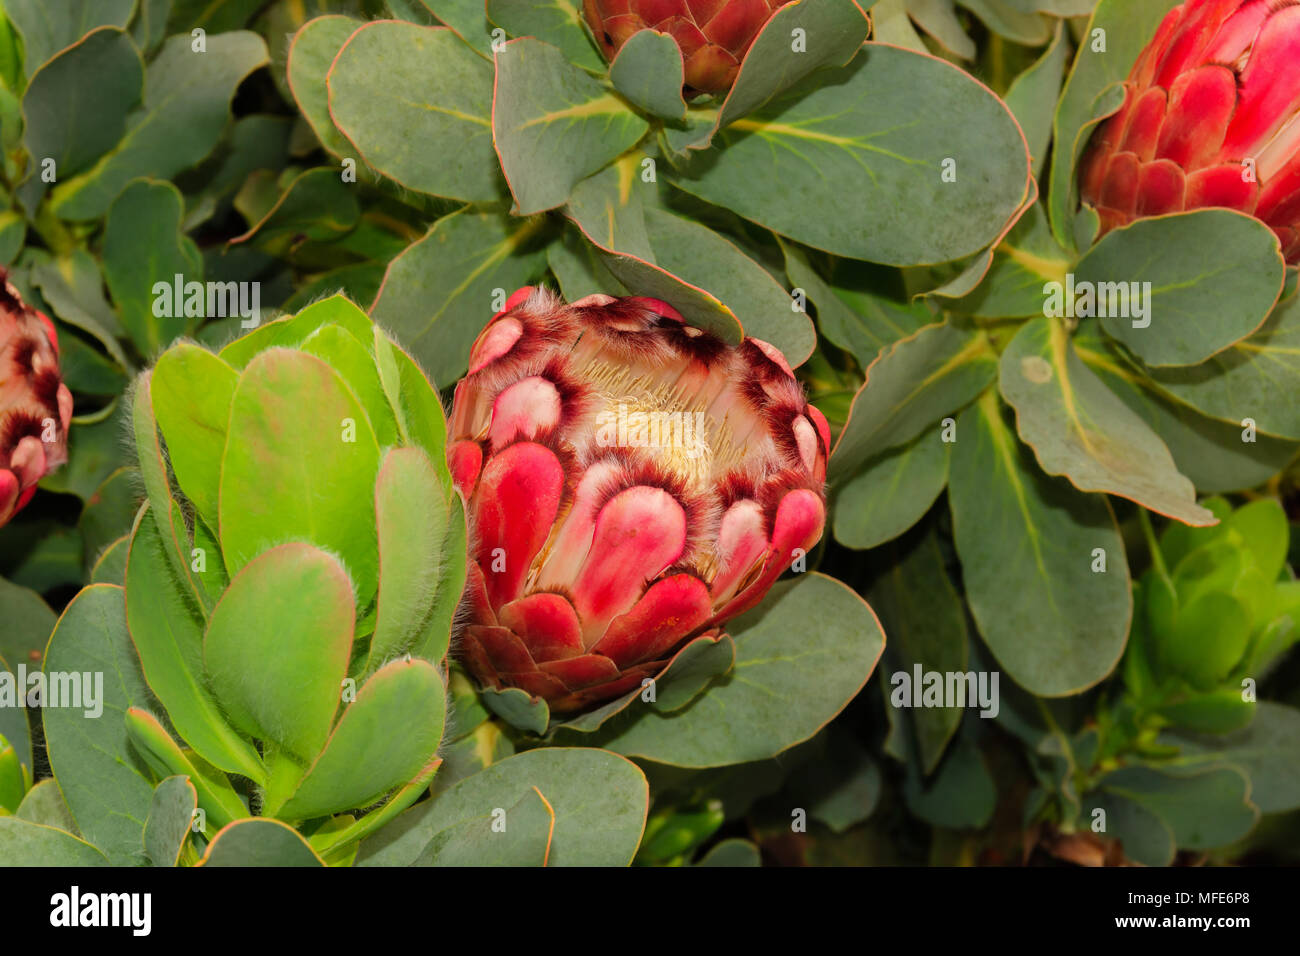 Red Sugarbush latin name protea grandiceps native to the sub tropical climate of the Western Cape region of South Africa Stock Photo